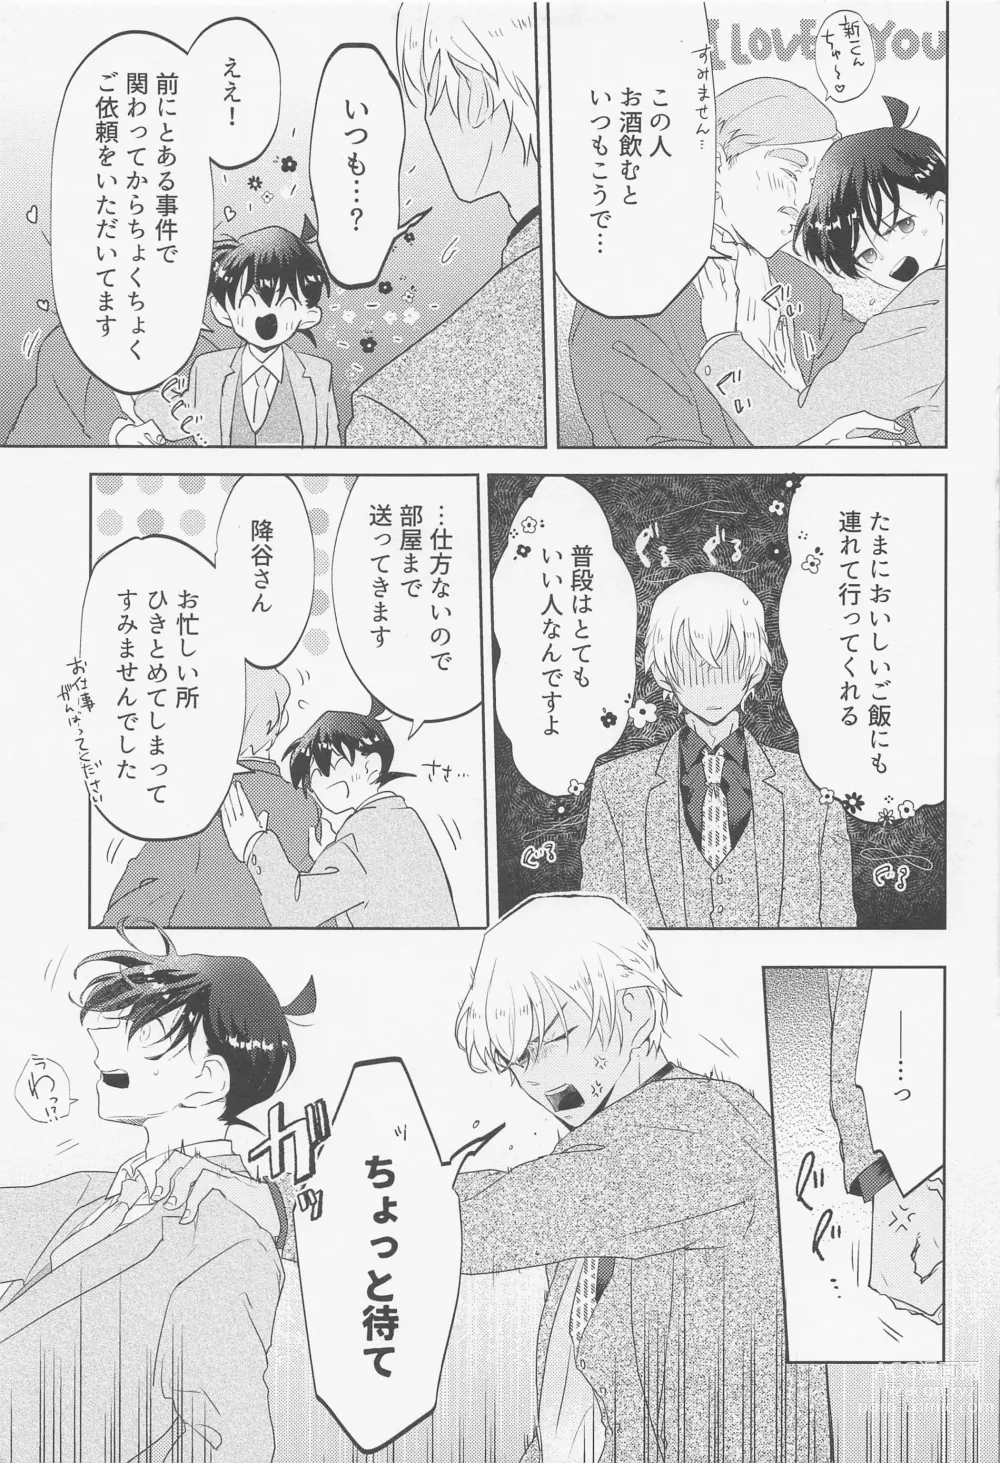 Page 10 of doujinshi Blind you by love